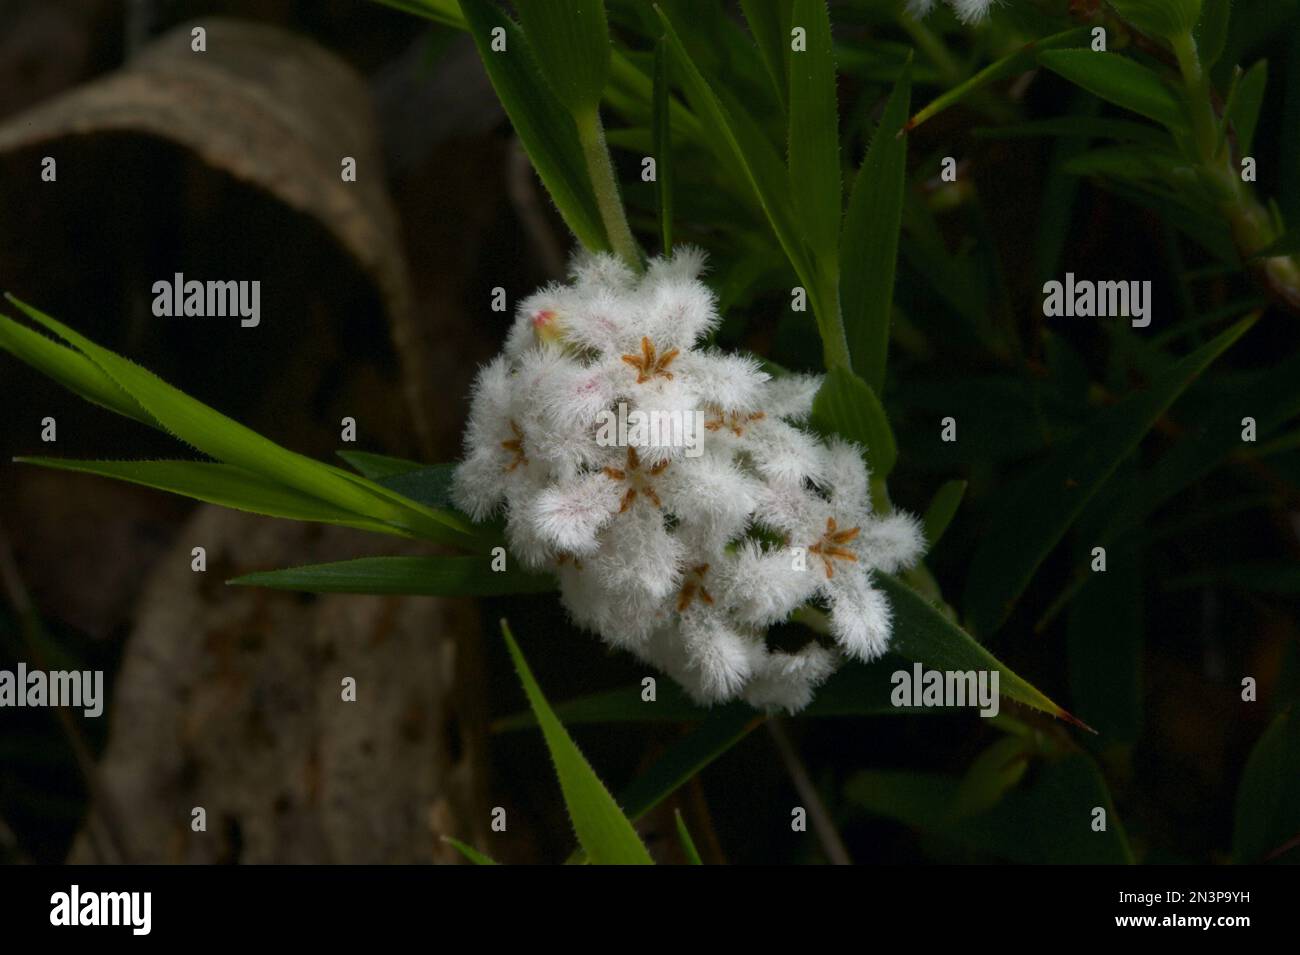 Slender Rice Flower (Pimelea Linifolia) looks like it should be called Woolly Rice Flower (Pimelea Octophylla), the flowers are so fluffy! Stock Photo